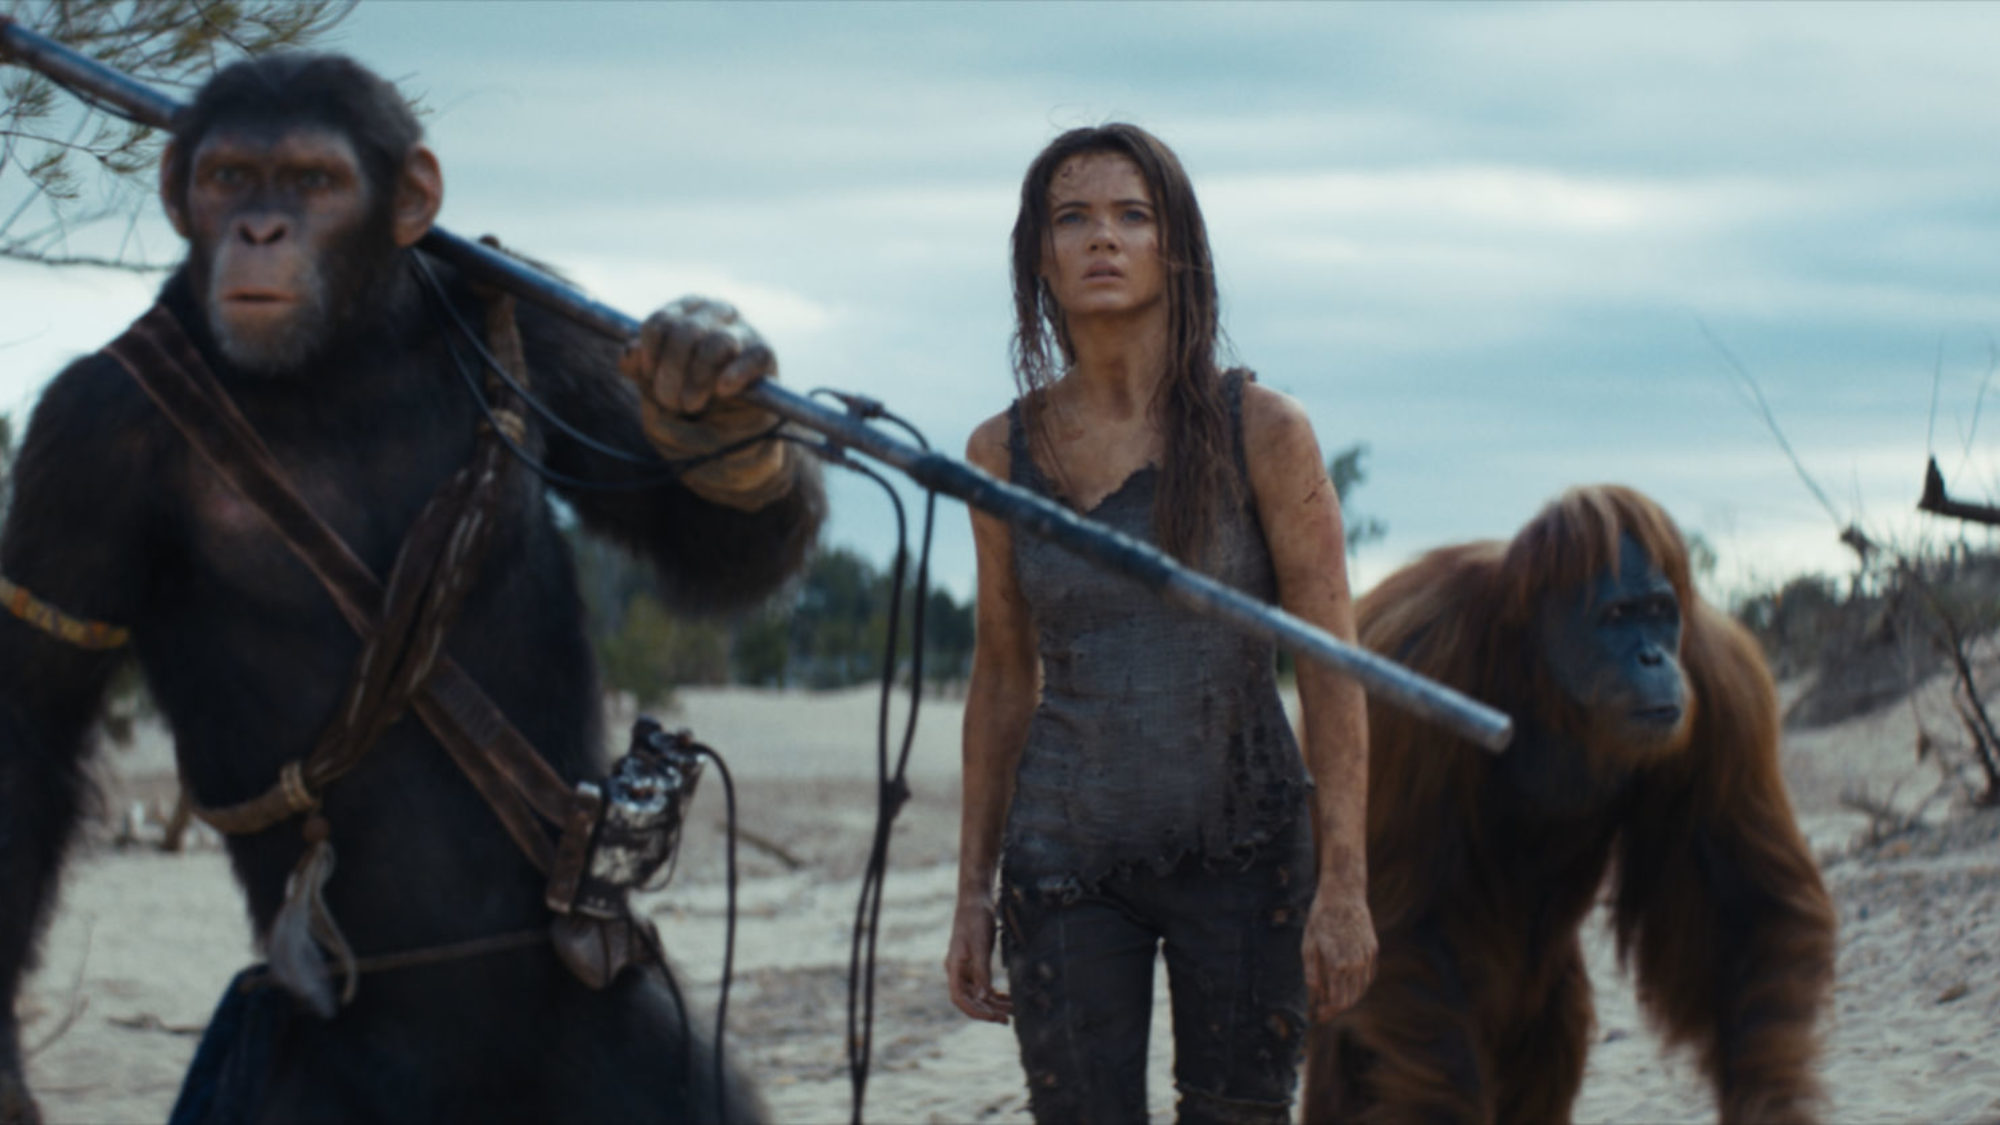 New Trailer, Posters, and Images For Kingdom of the of the Apes